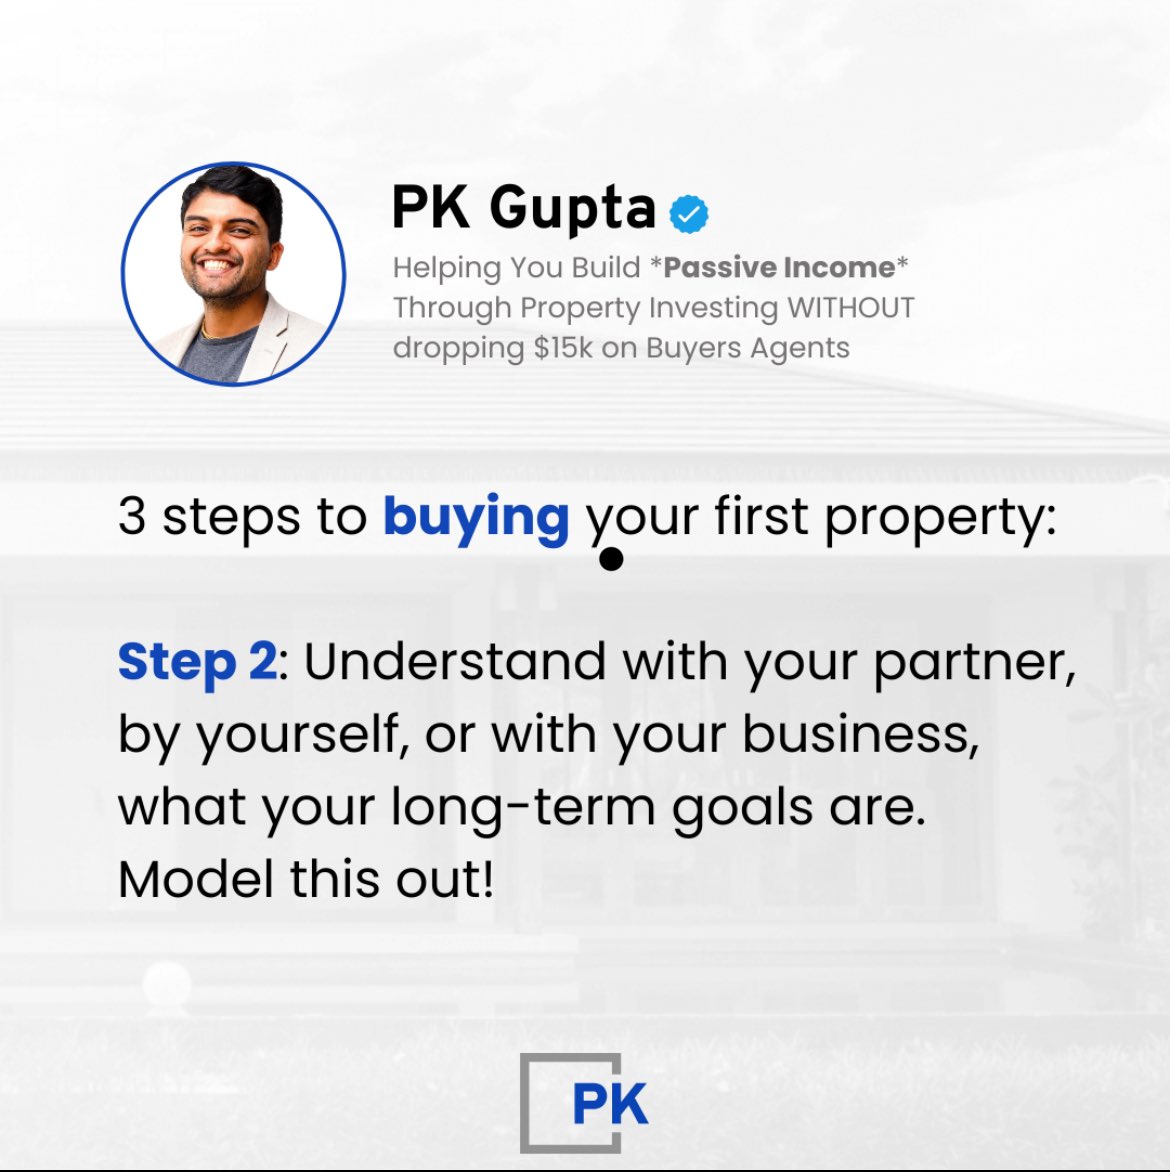 The second step to buying your first property is to understand what your long term goals are with property investing! Model this out in detail so you know where you are at every step of the way!

#realestate #realestatelife #realestateinvestor #realestateinvesting #passiveincome…